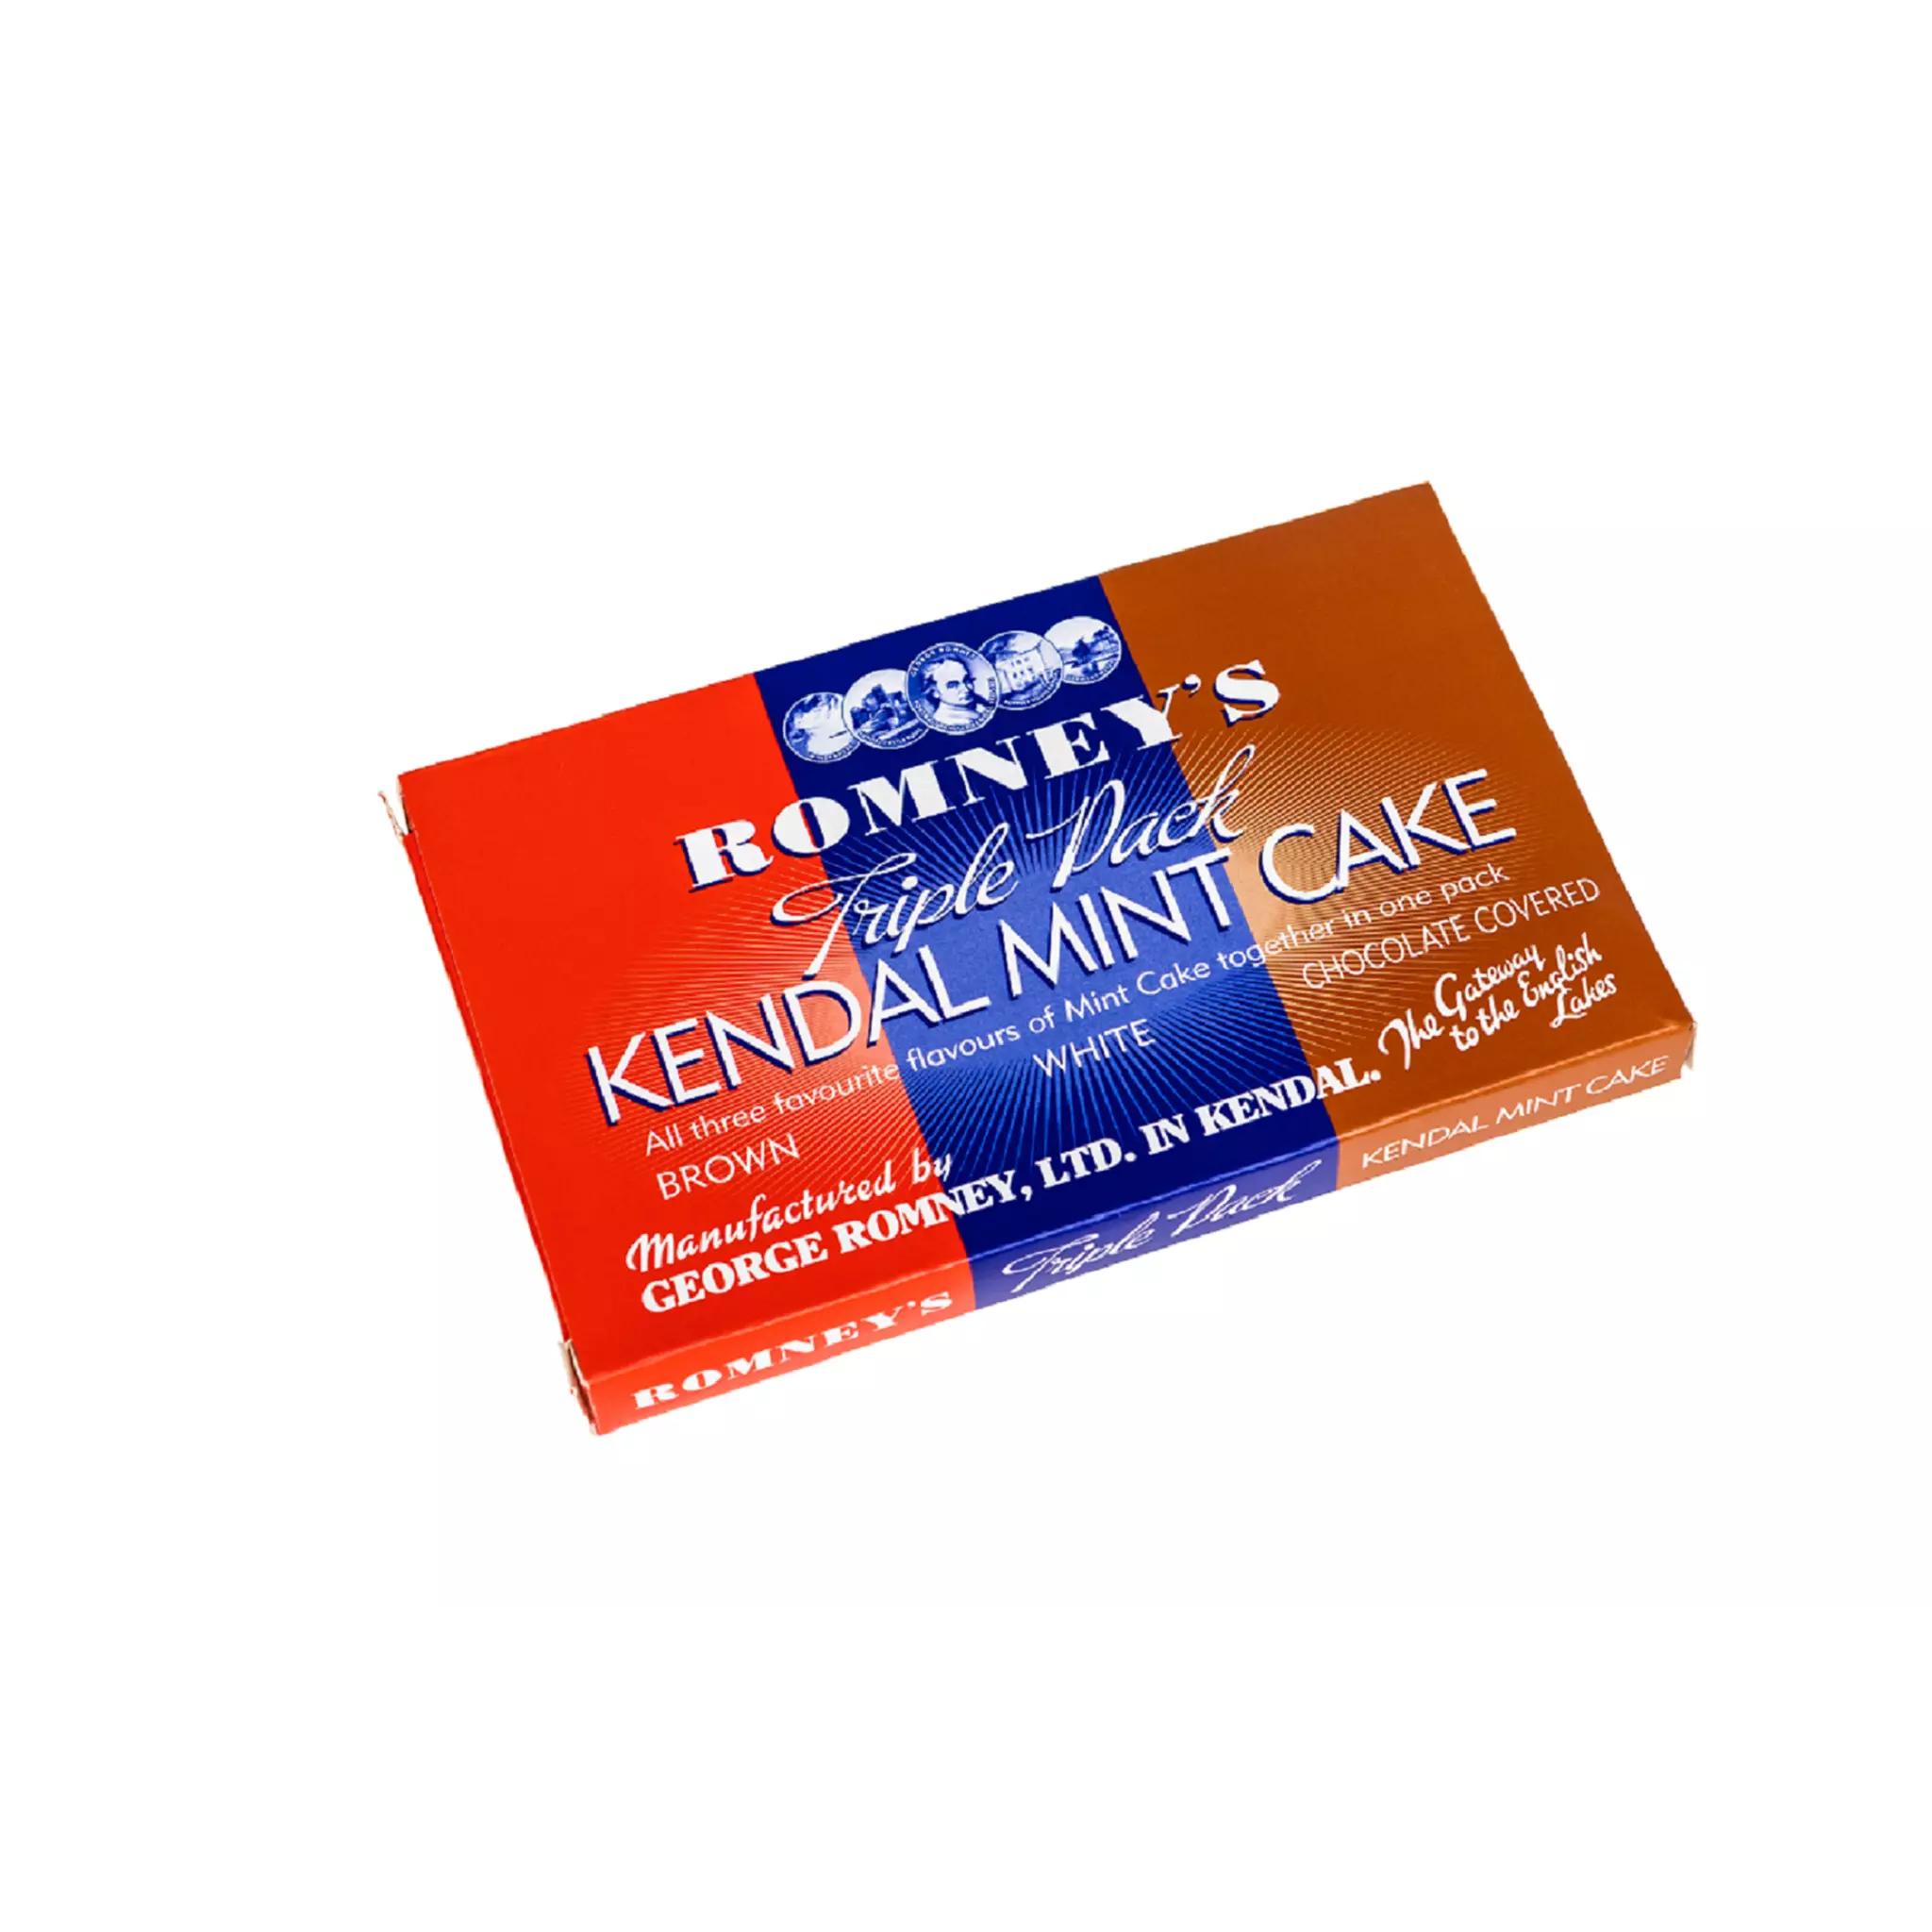 A rectangular cardboard box containing three bars of Kendal Mint Cake. The box is split into three different colours, red on the left, blue in the middle and brown on the right. The box features the Romney's logo and words 'Romney's triple pack Kendal Mint Cake' in a white font.